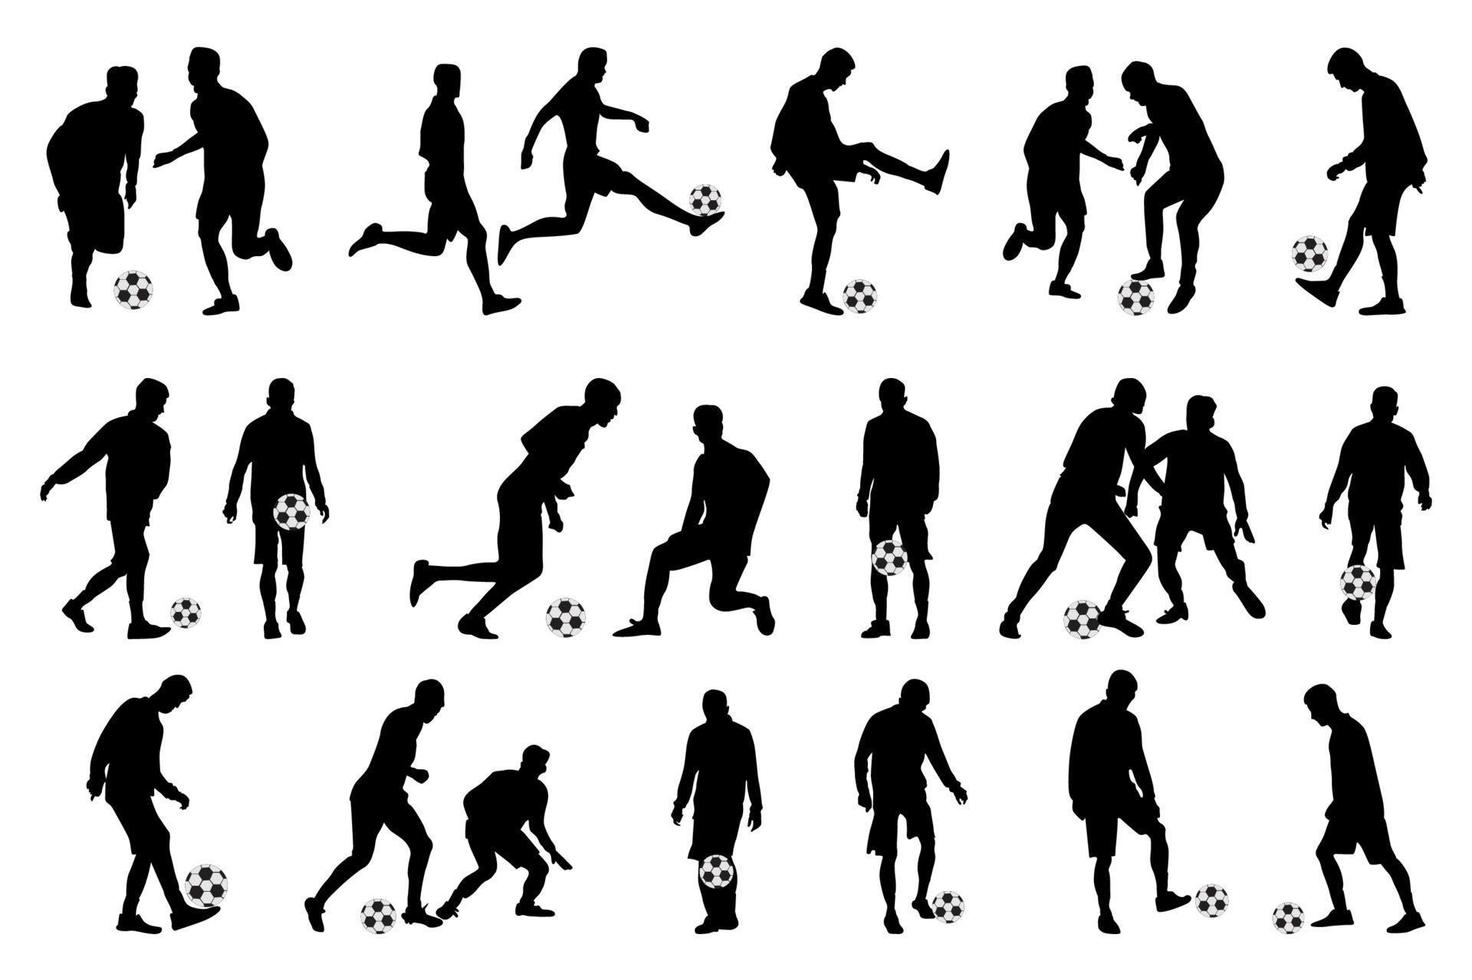 Set of football, soccer players, Football, soccer, players silhouette vector